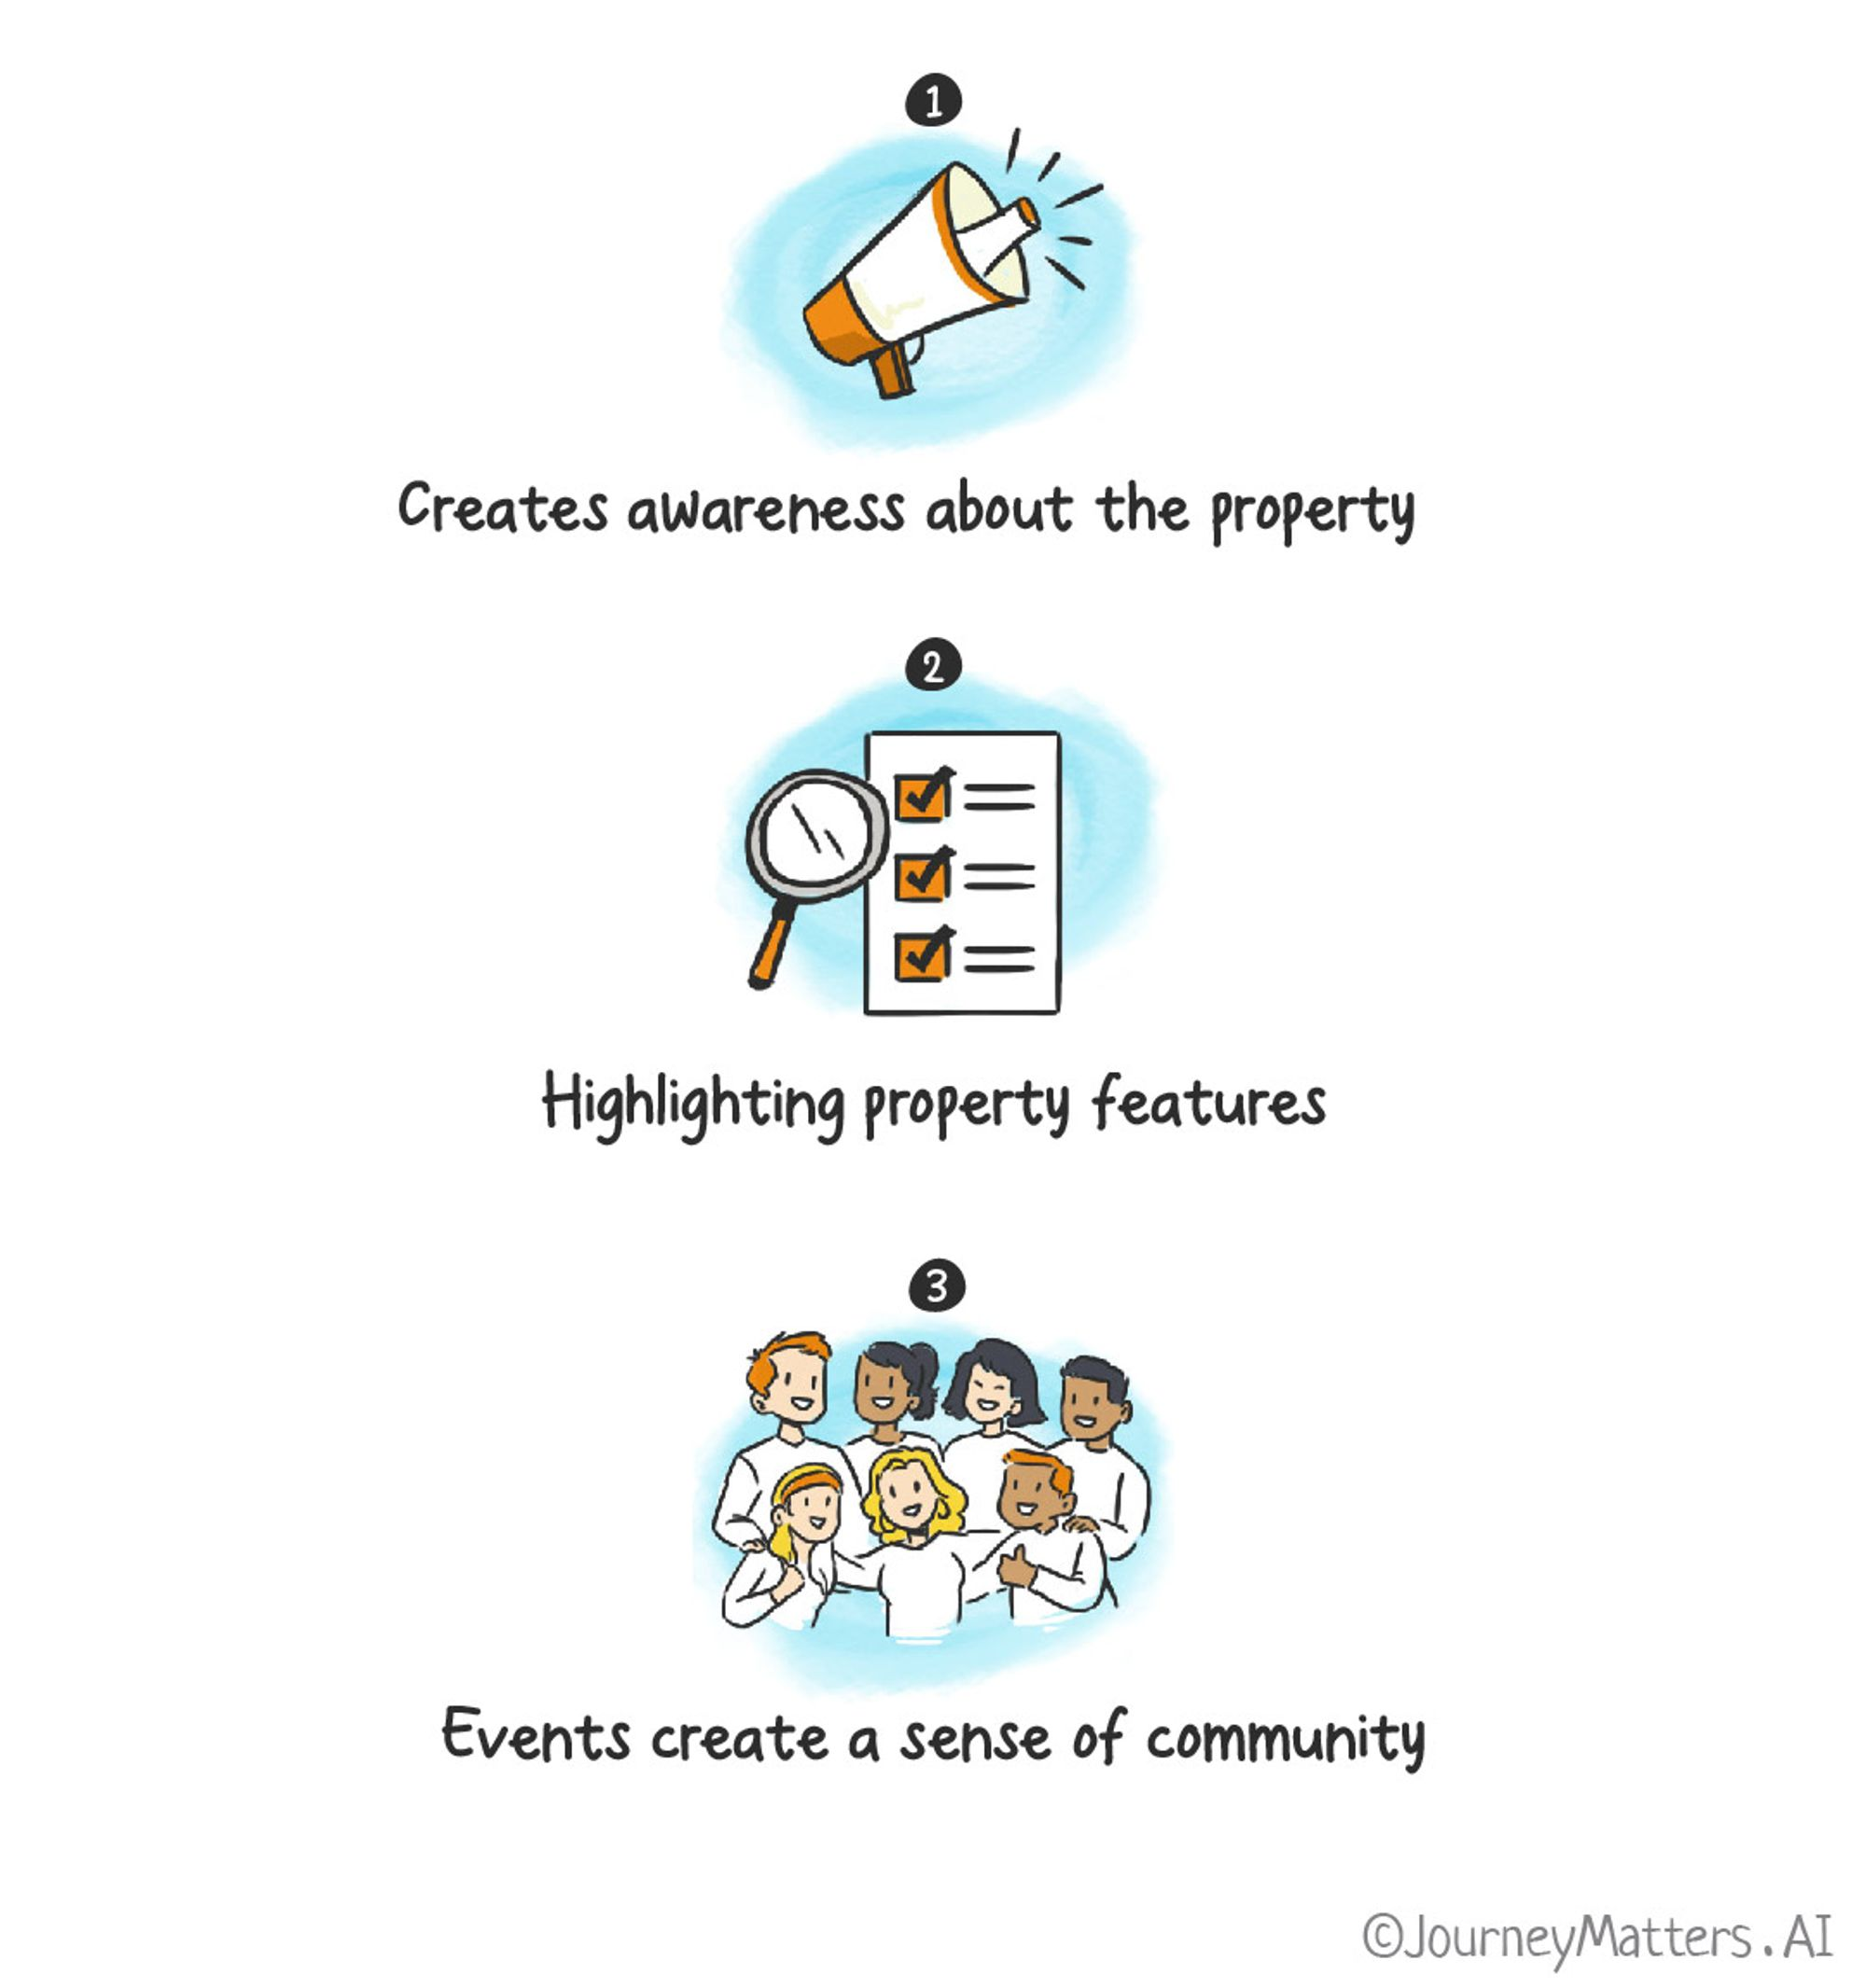 Why do we need events in multiamily; to create awareness and highlight property features and create sense of community